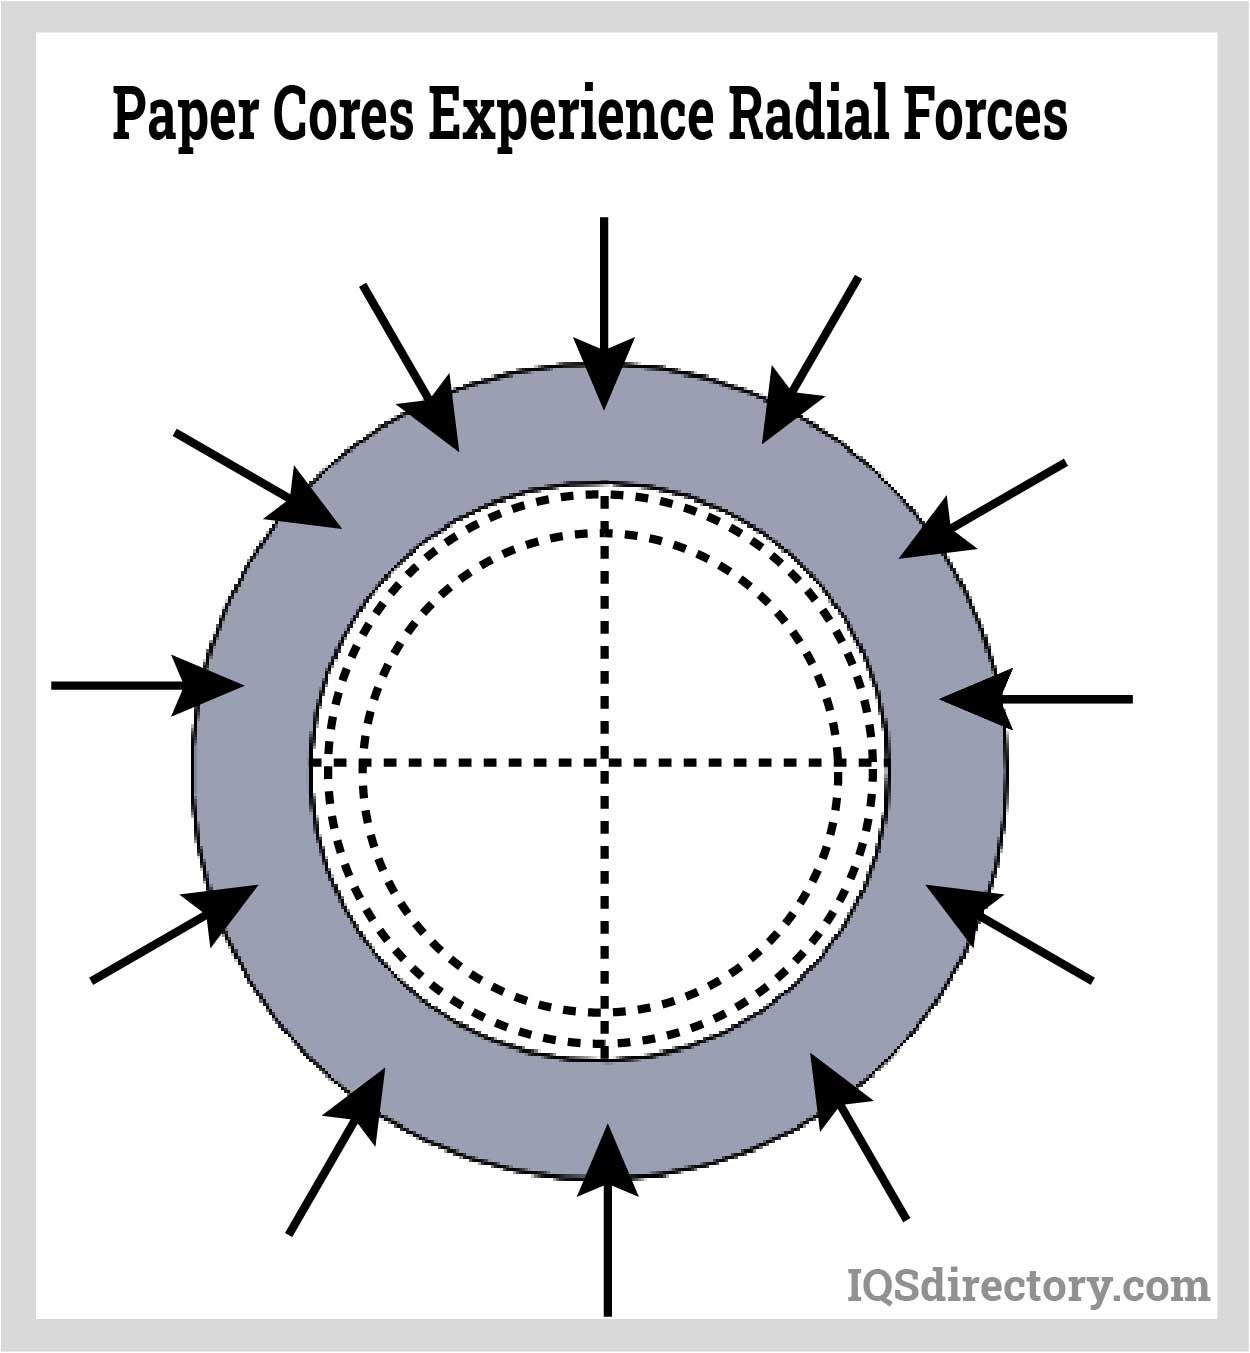 Paper Cores Experience Radial Forces